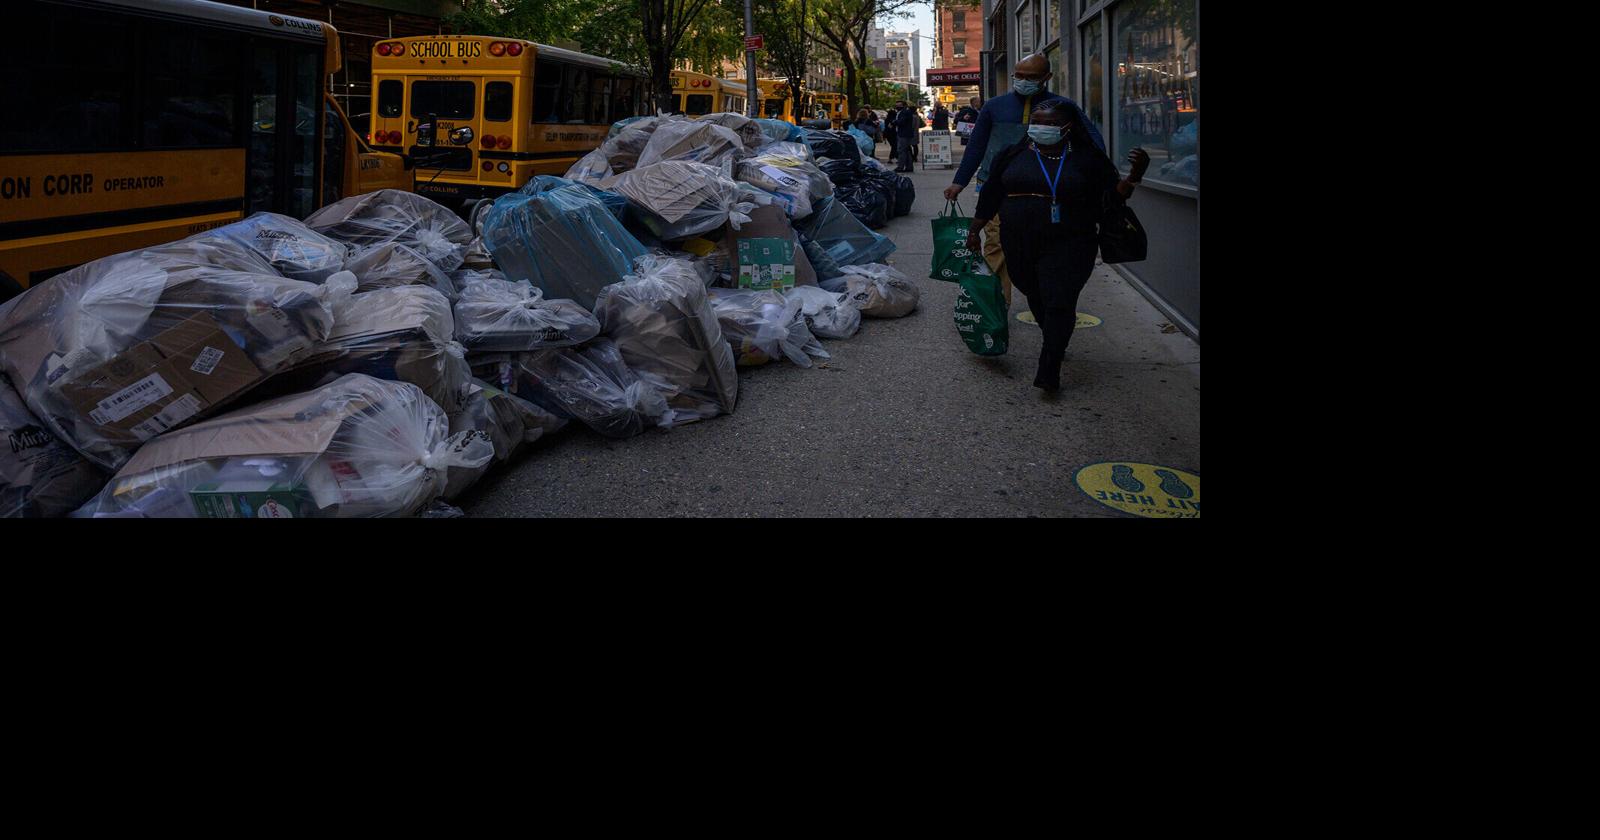 Parts of New York City experienced trash pickup delays last week as  sanitation department deals with service issues, National